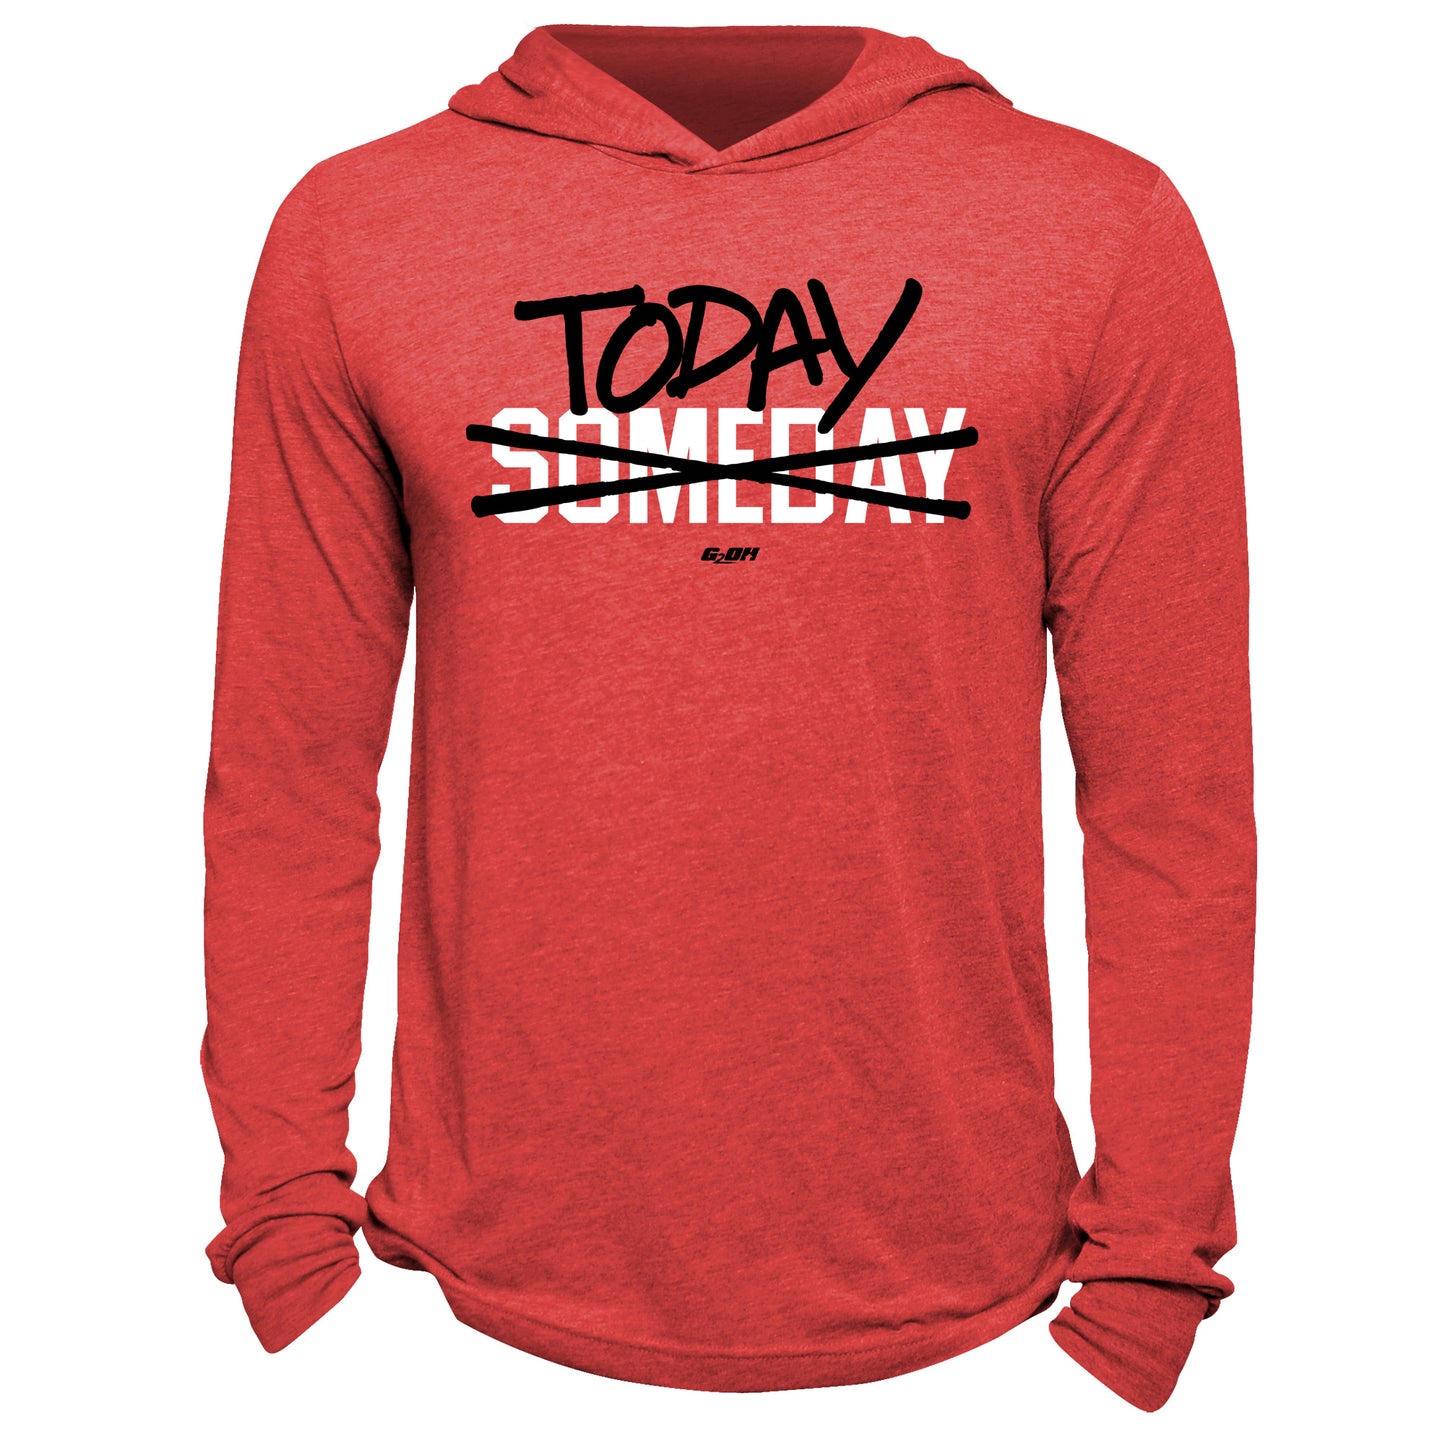 Today Not Someday Hoodie